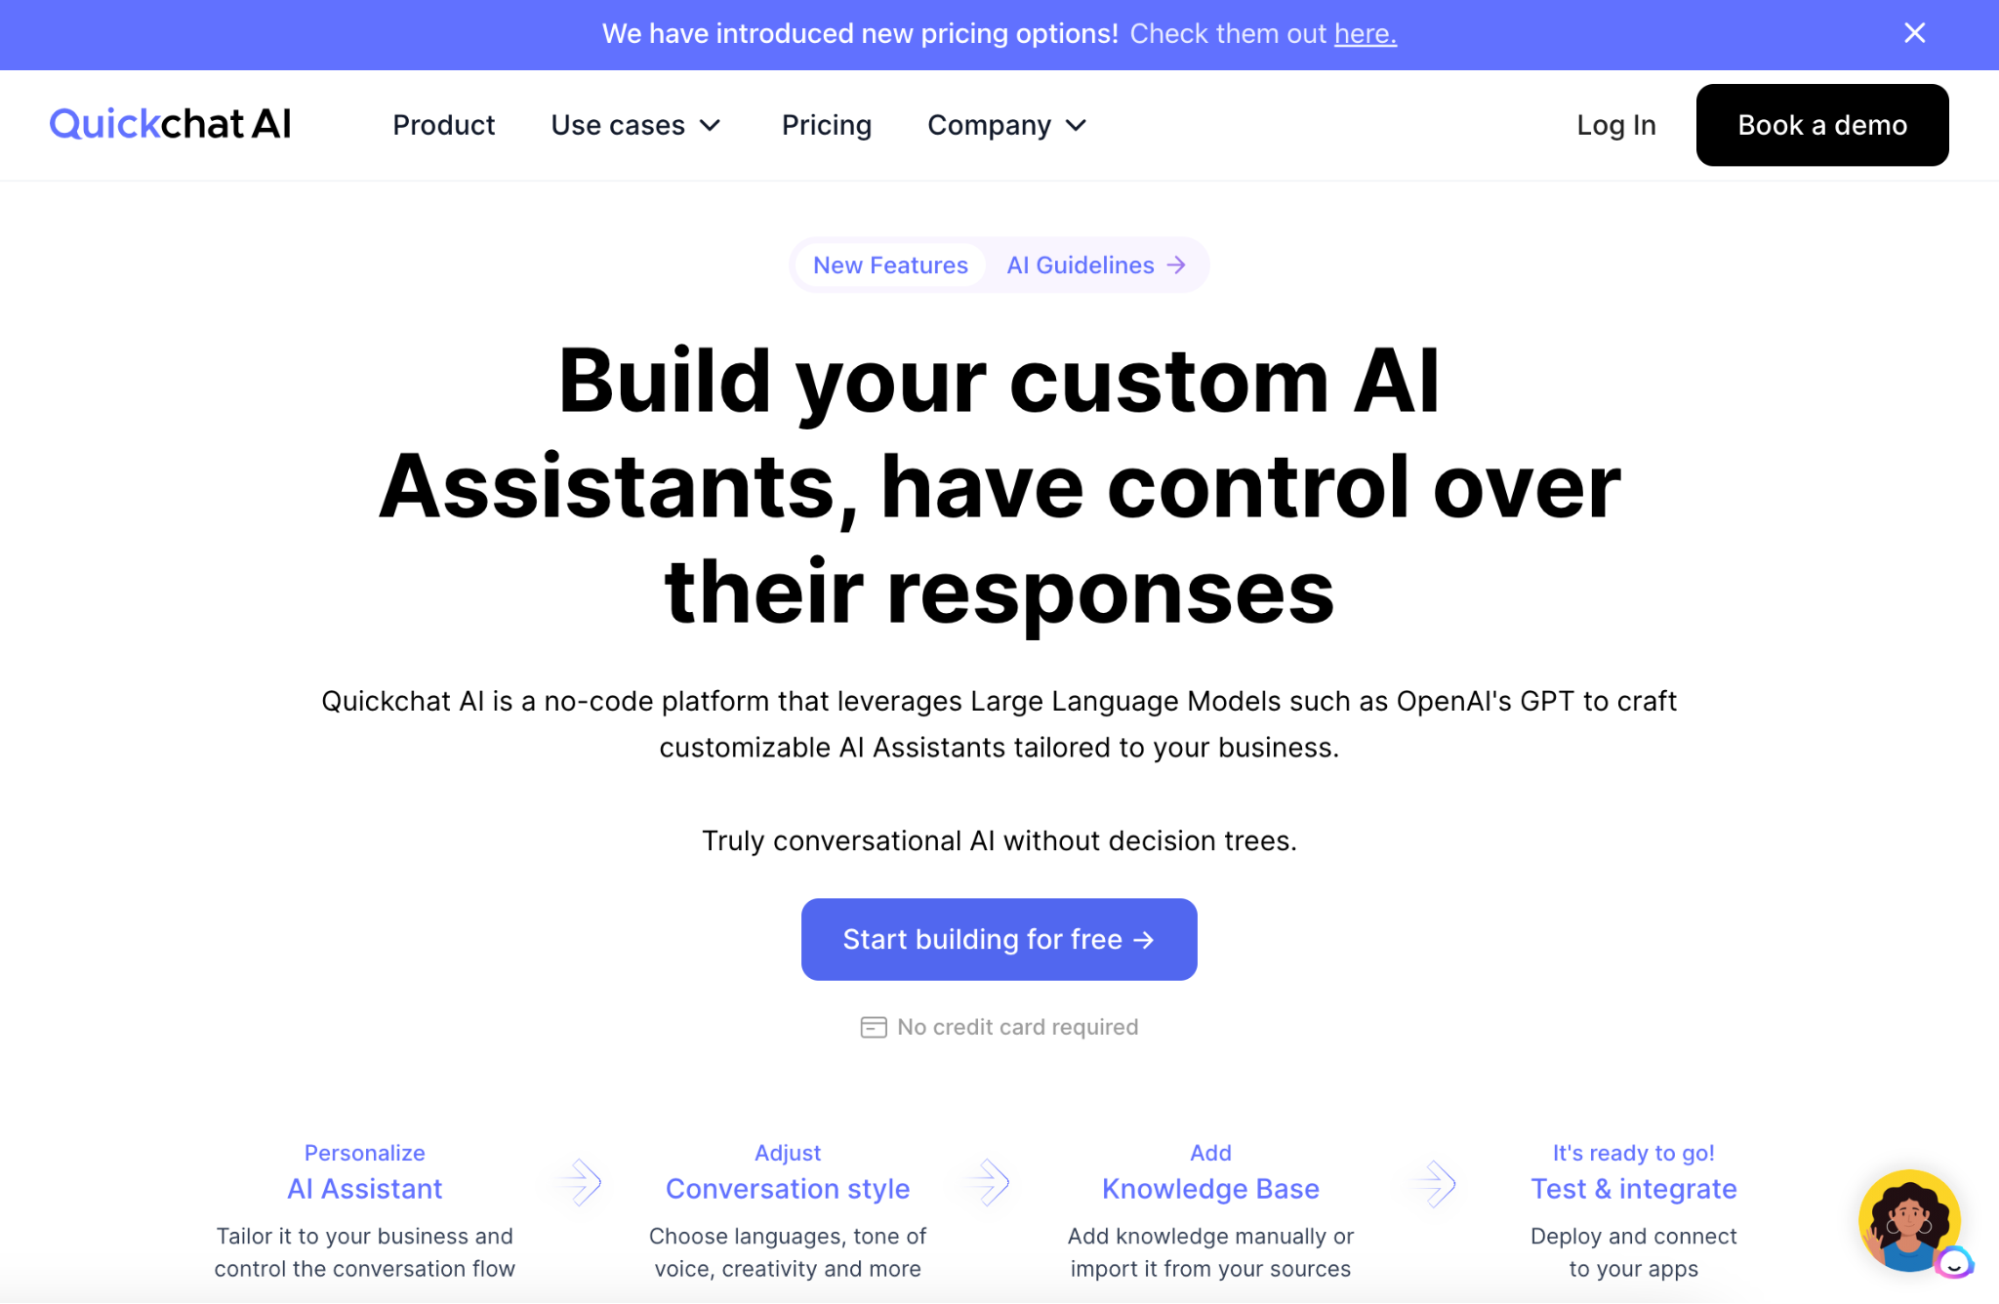 Screenshot of the quickchat.ai homepage